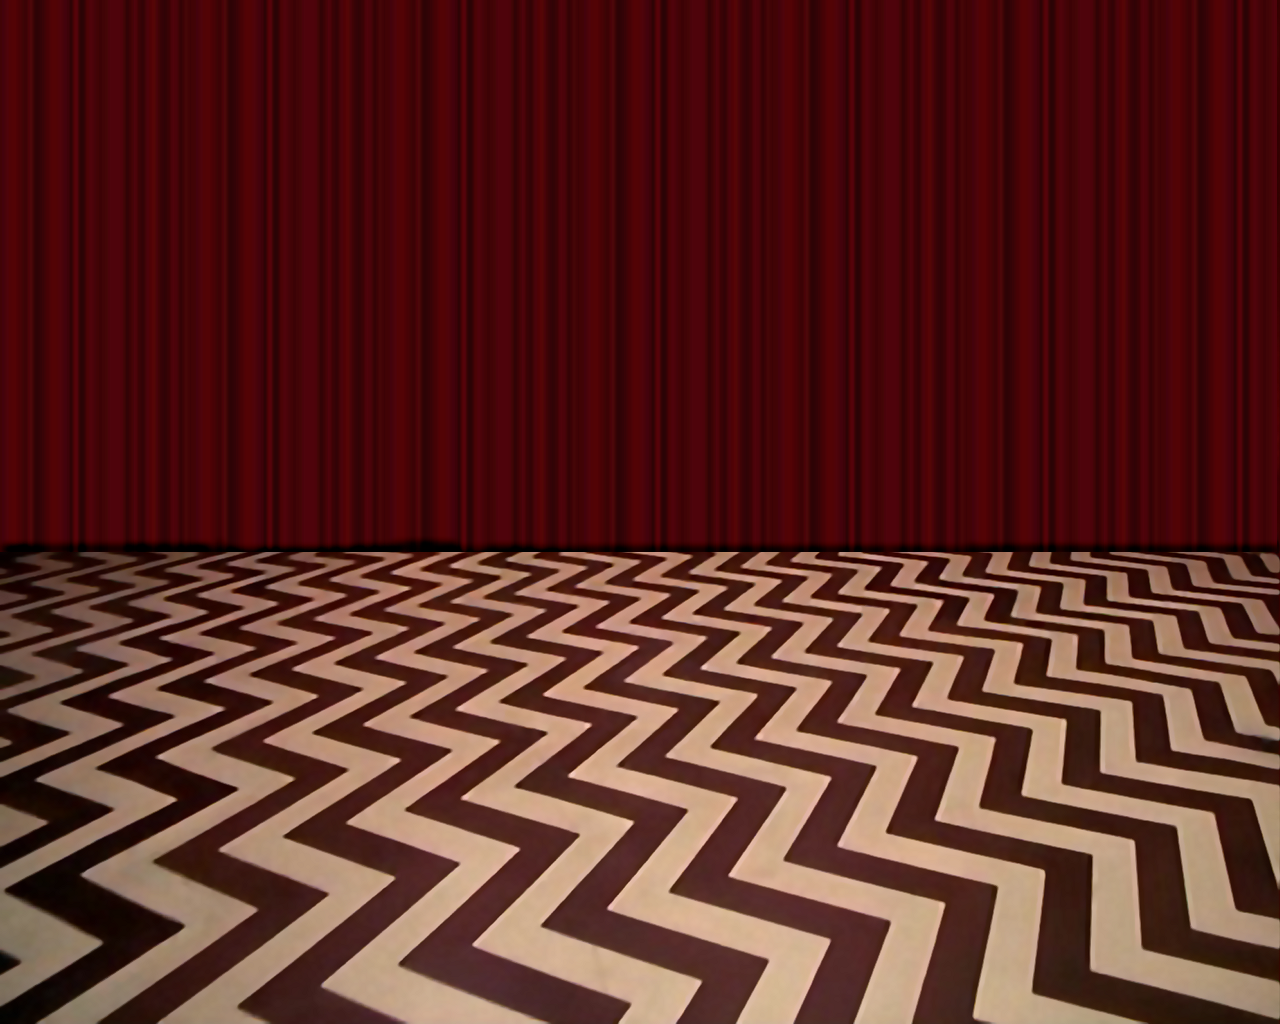 Twin Peaks Red Room Wallpaper Image Amp Pictures Becuo